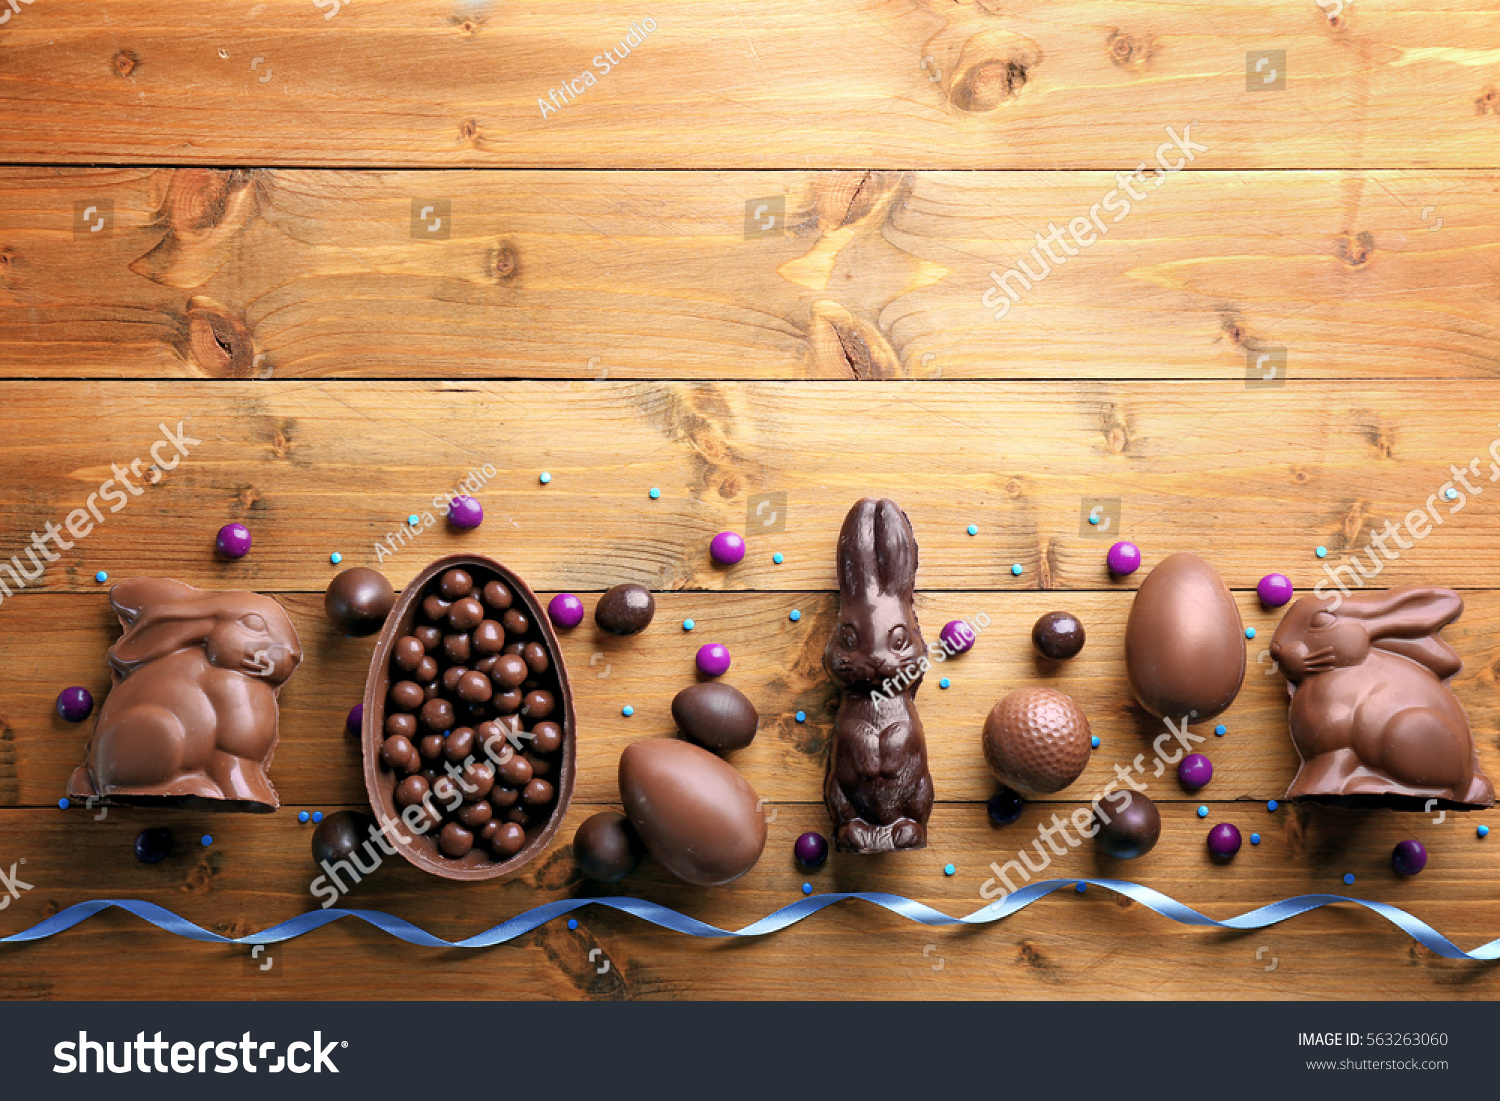 Chocolate Easter eggs, rabbits and sweets on wooden background #563263060